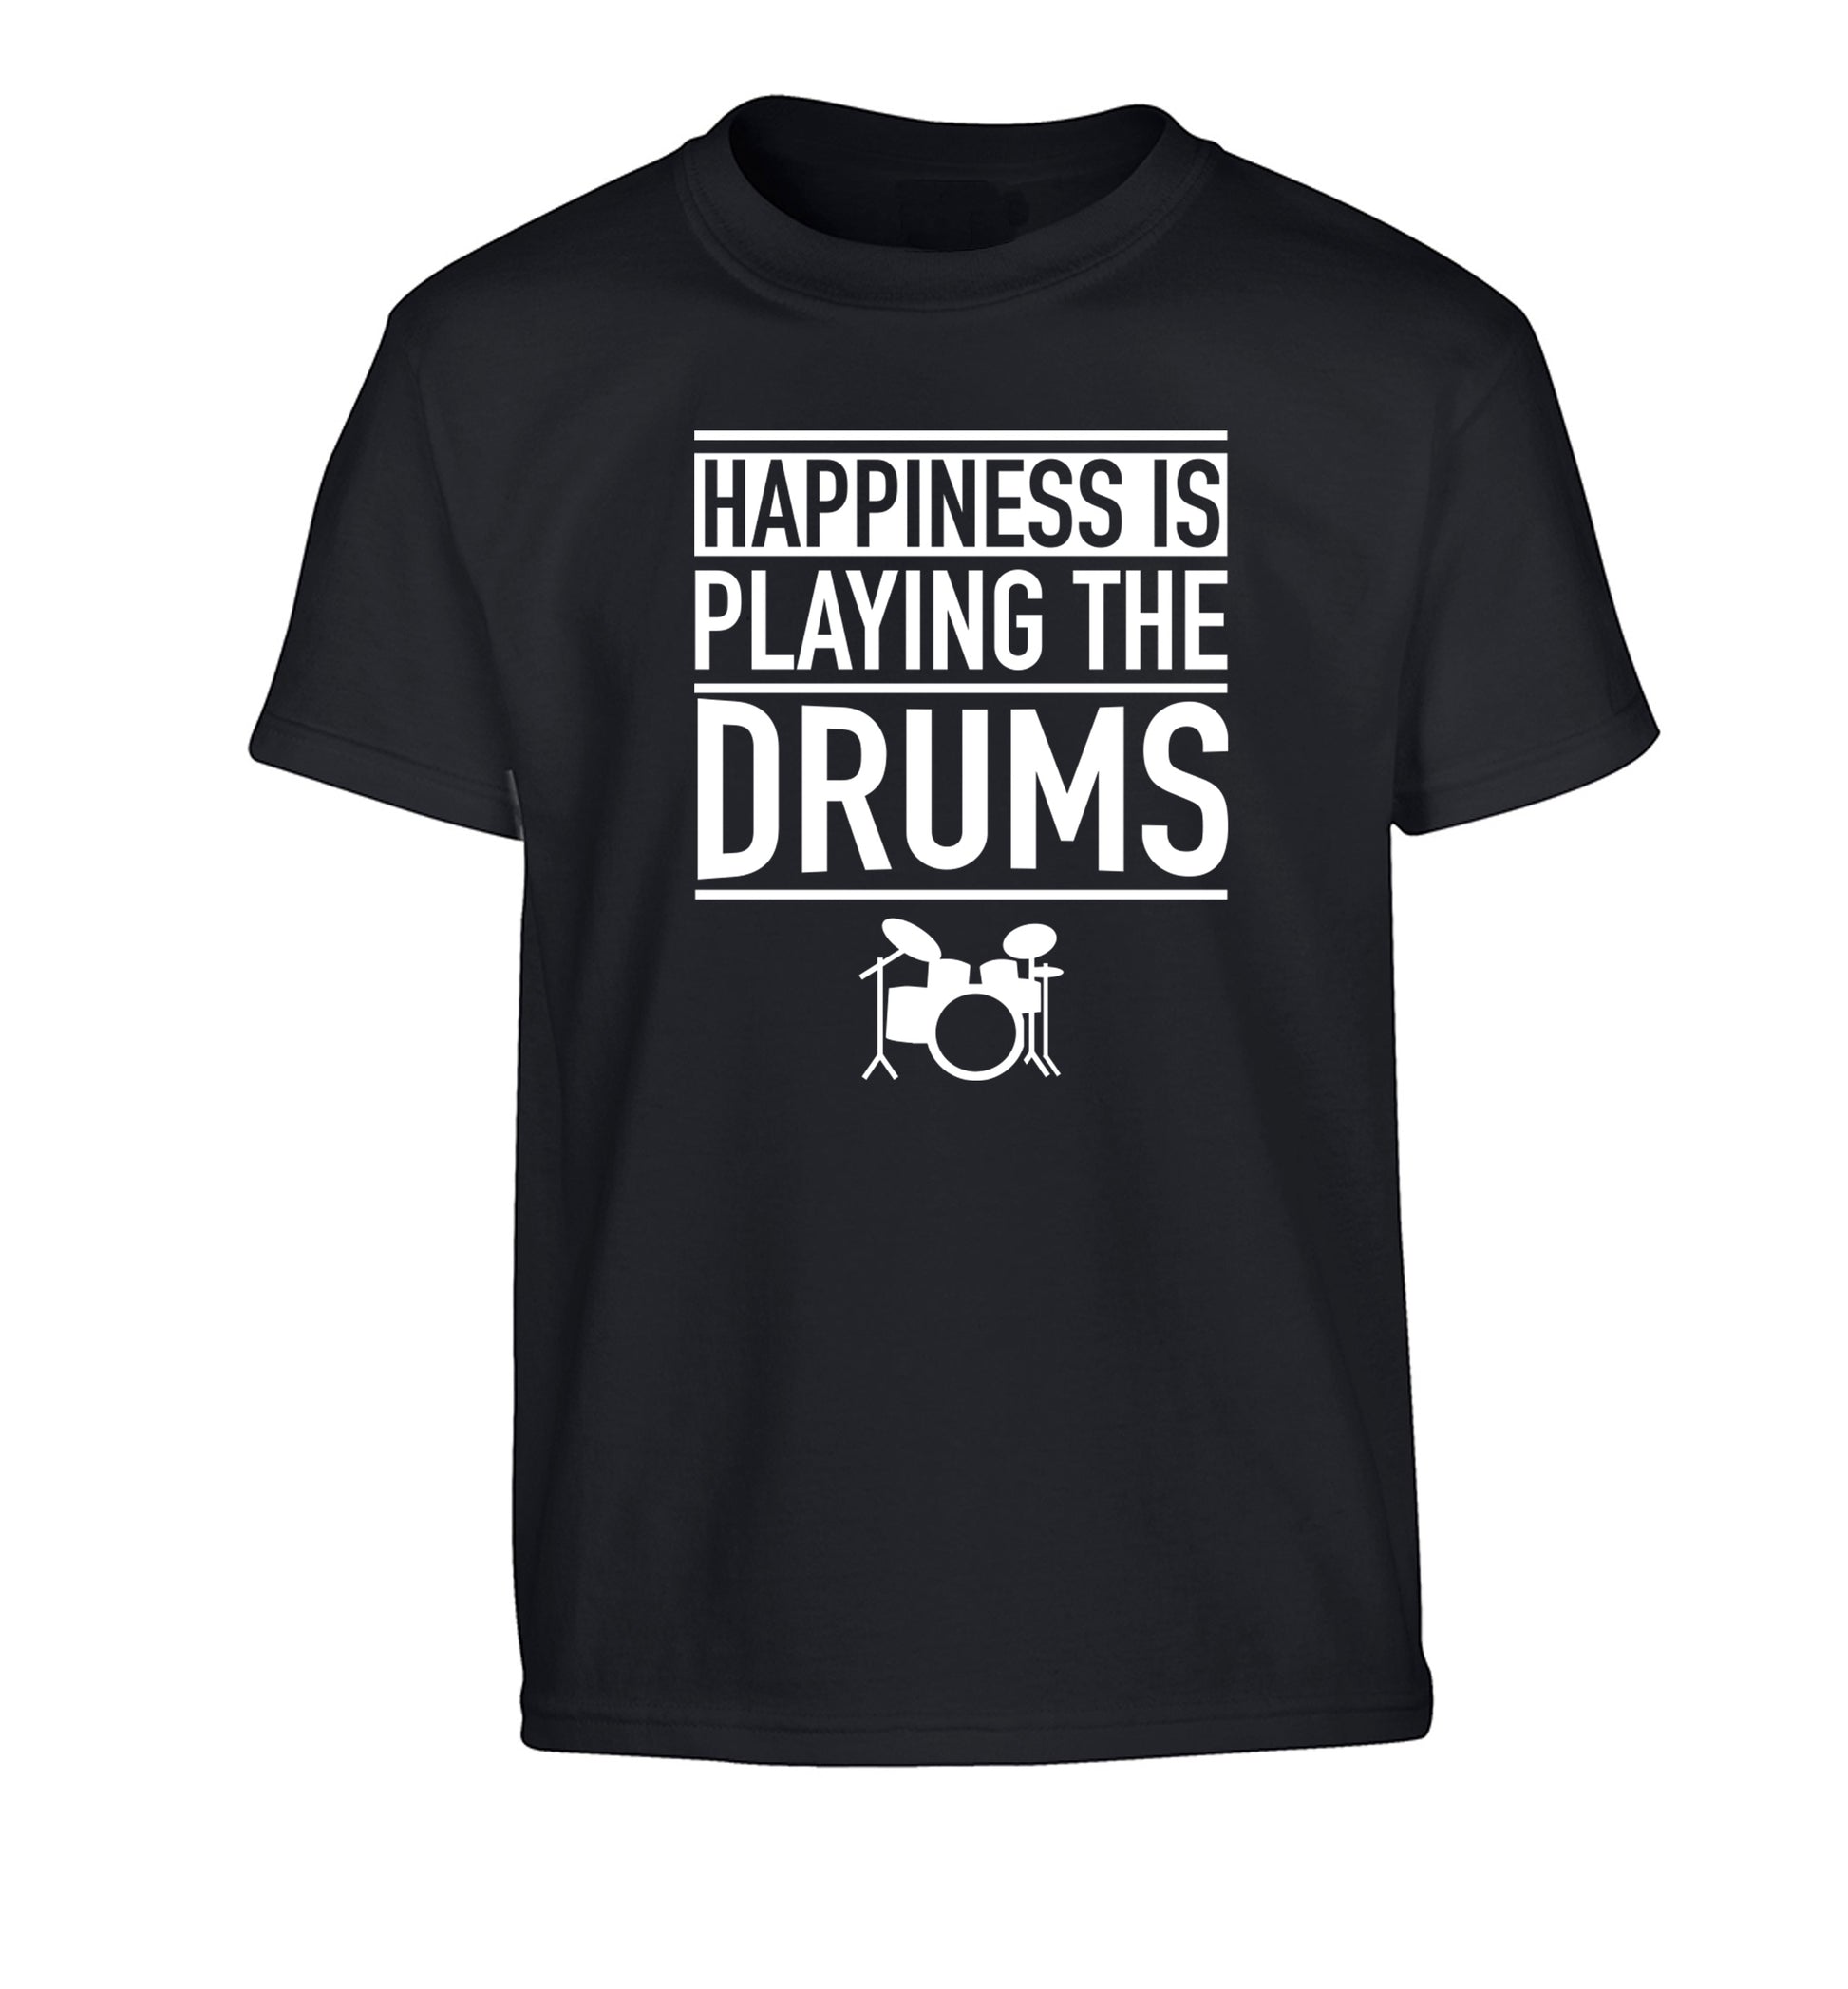 Happiness is playing the drums Children's black Tshirt 12-14 Years